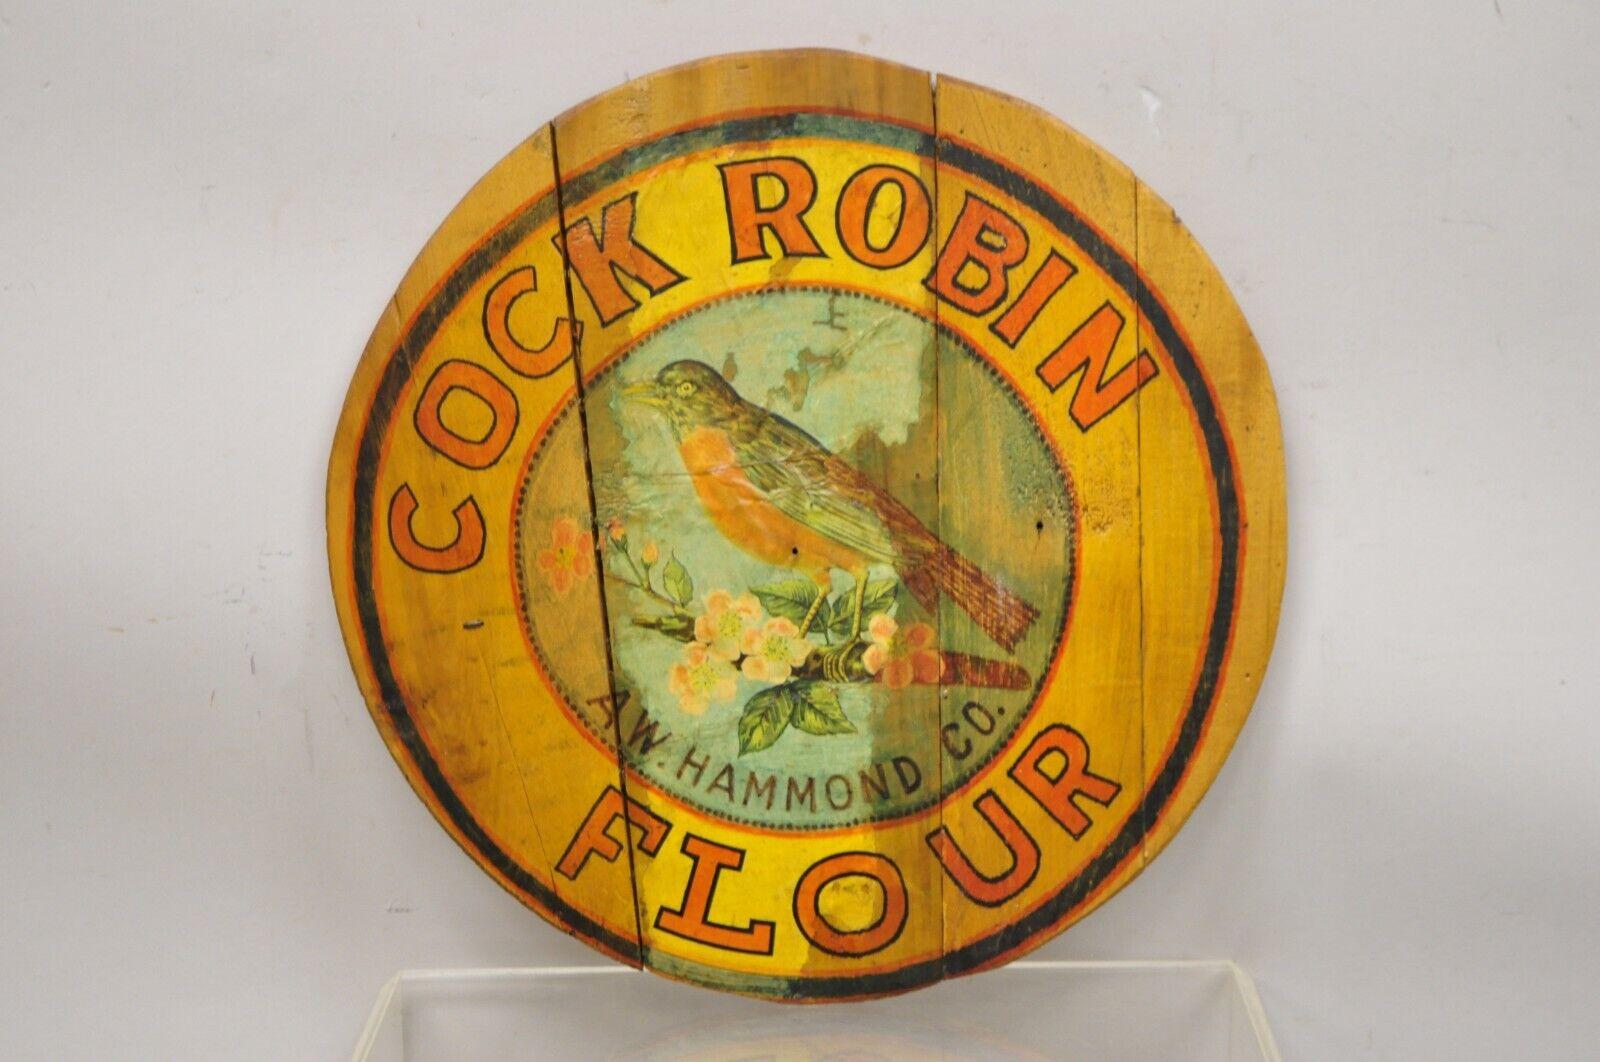 Vintage Cock Robin Flour AW Hammond Co round wood advertisement plaque. Circa Early to Mid 1900s. Measurements: 17